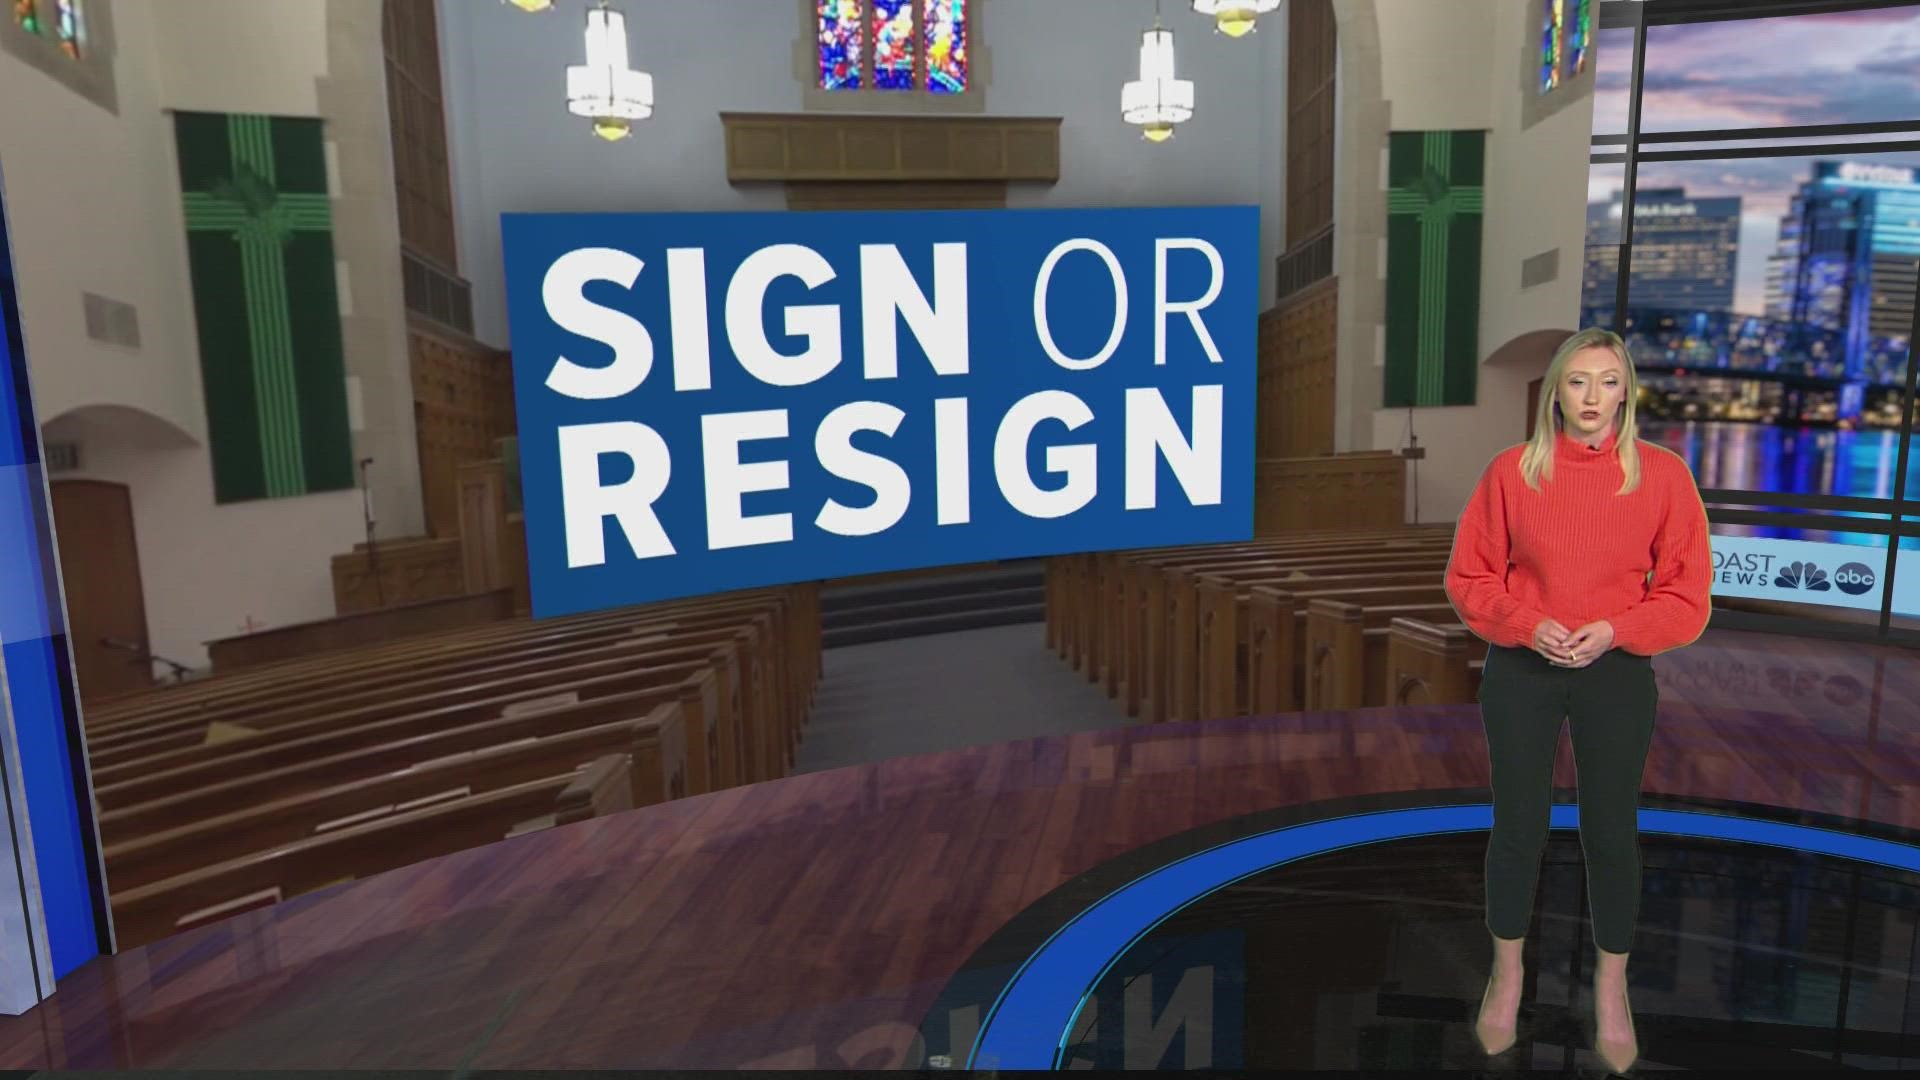 The church, which has long opposed LGBTQ rights in Jacksonville, is now requiring members to sign an anti-gay pledge to remain in the church.